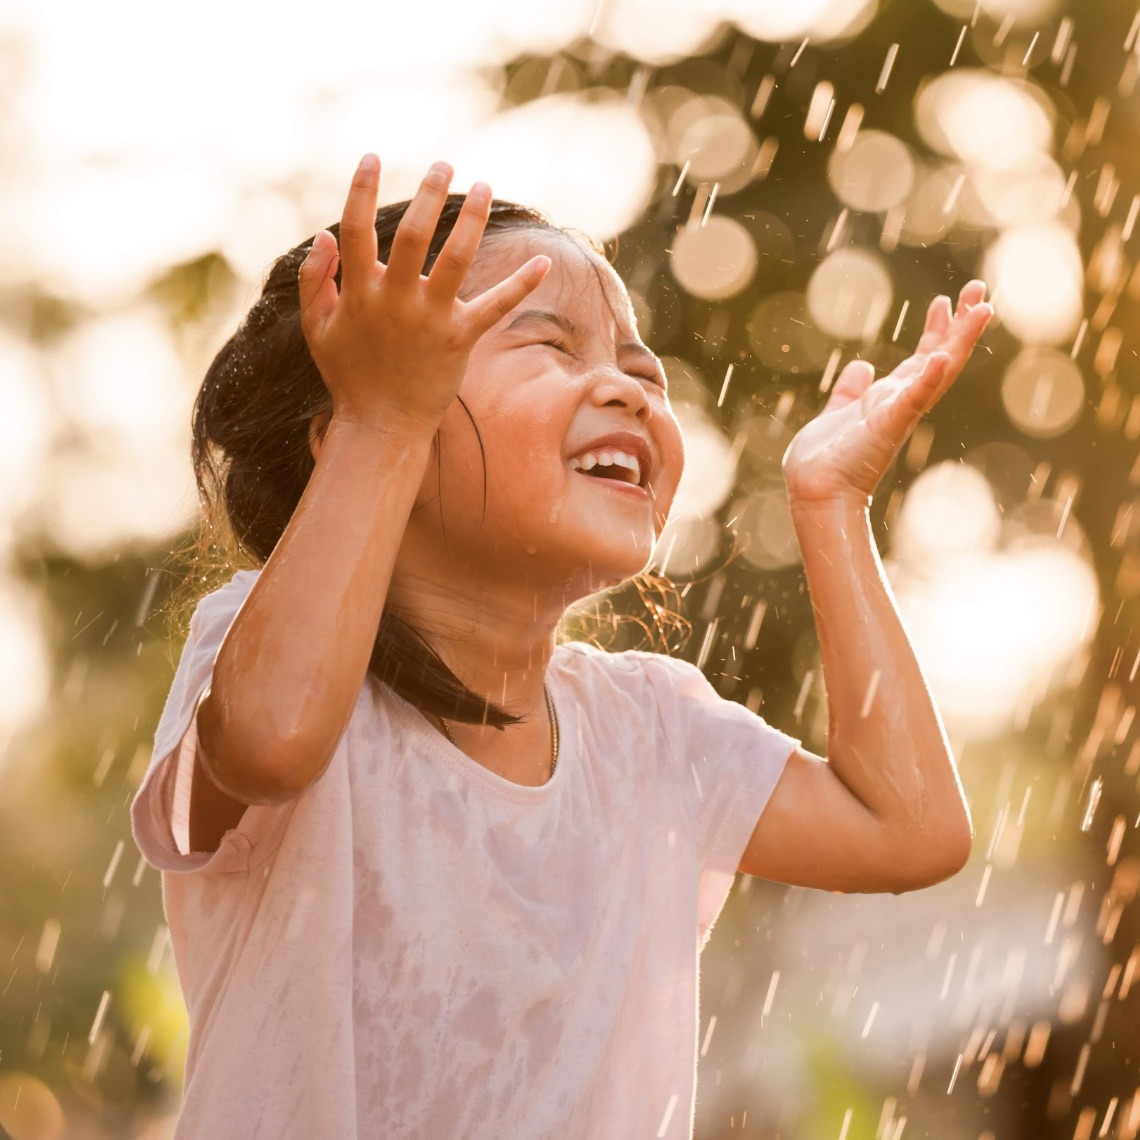 Young girl playing in a sprinkler on a hot day